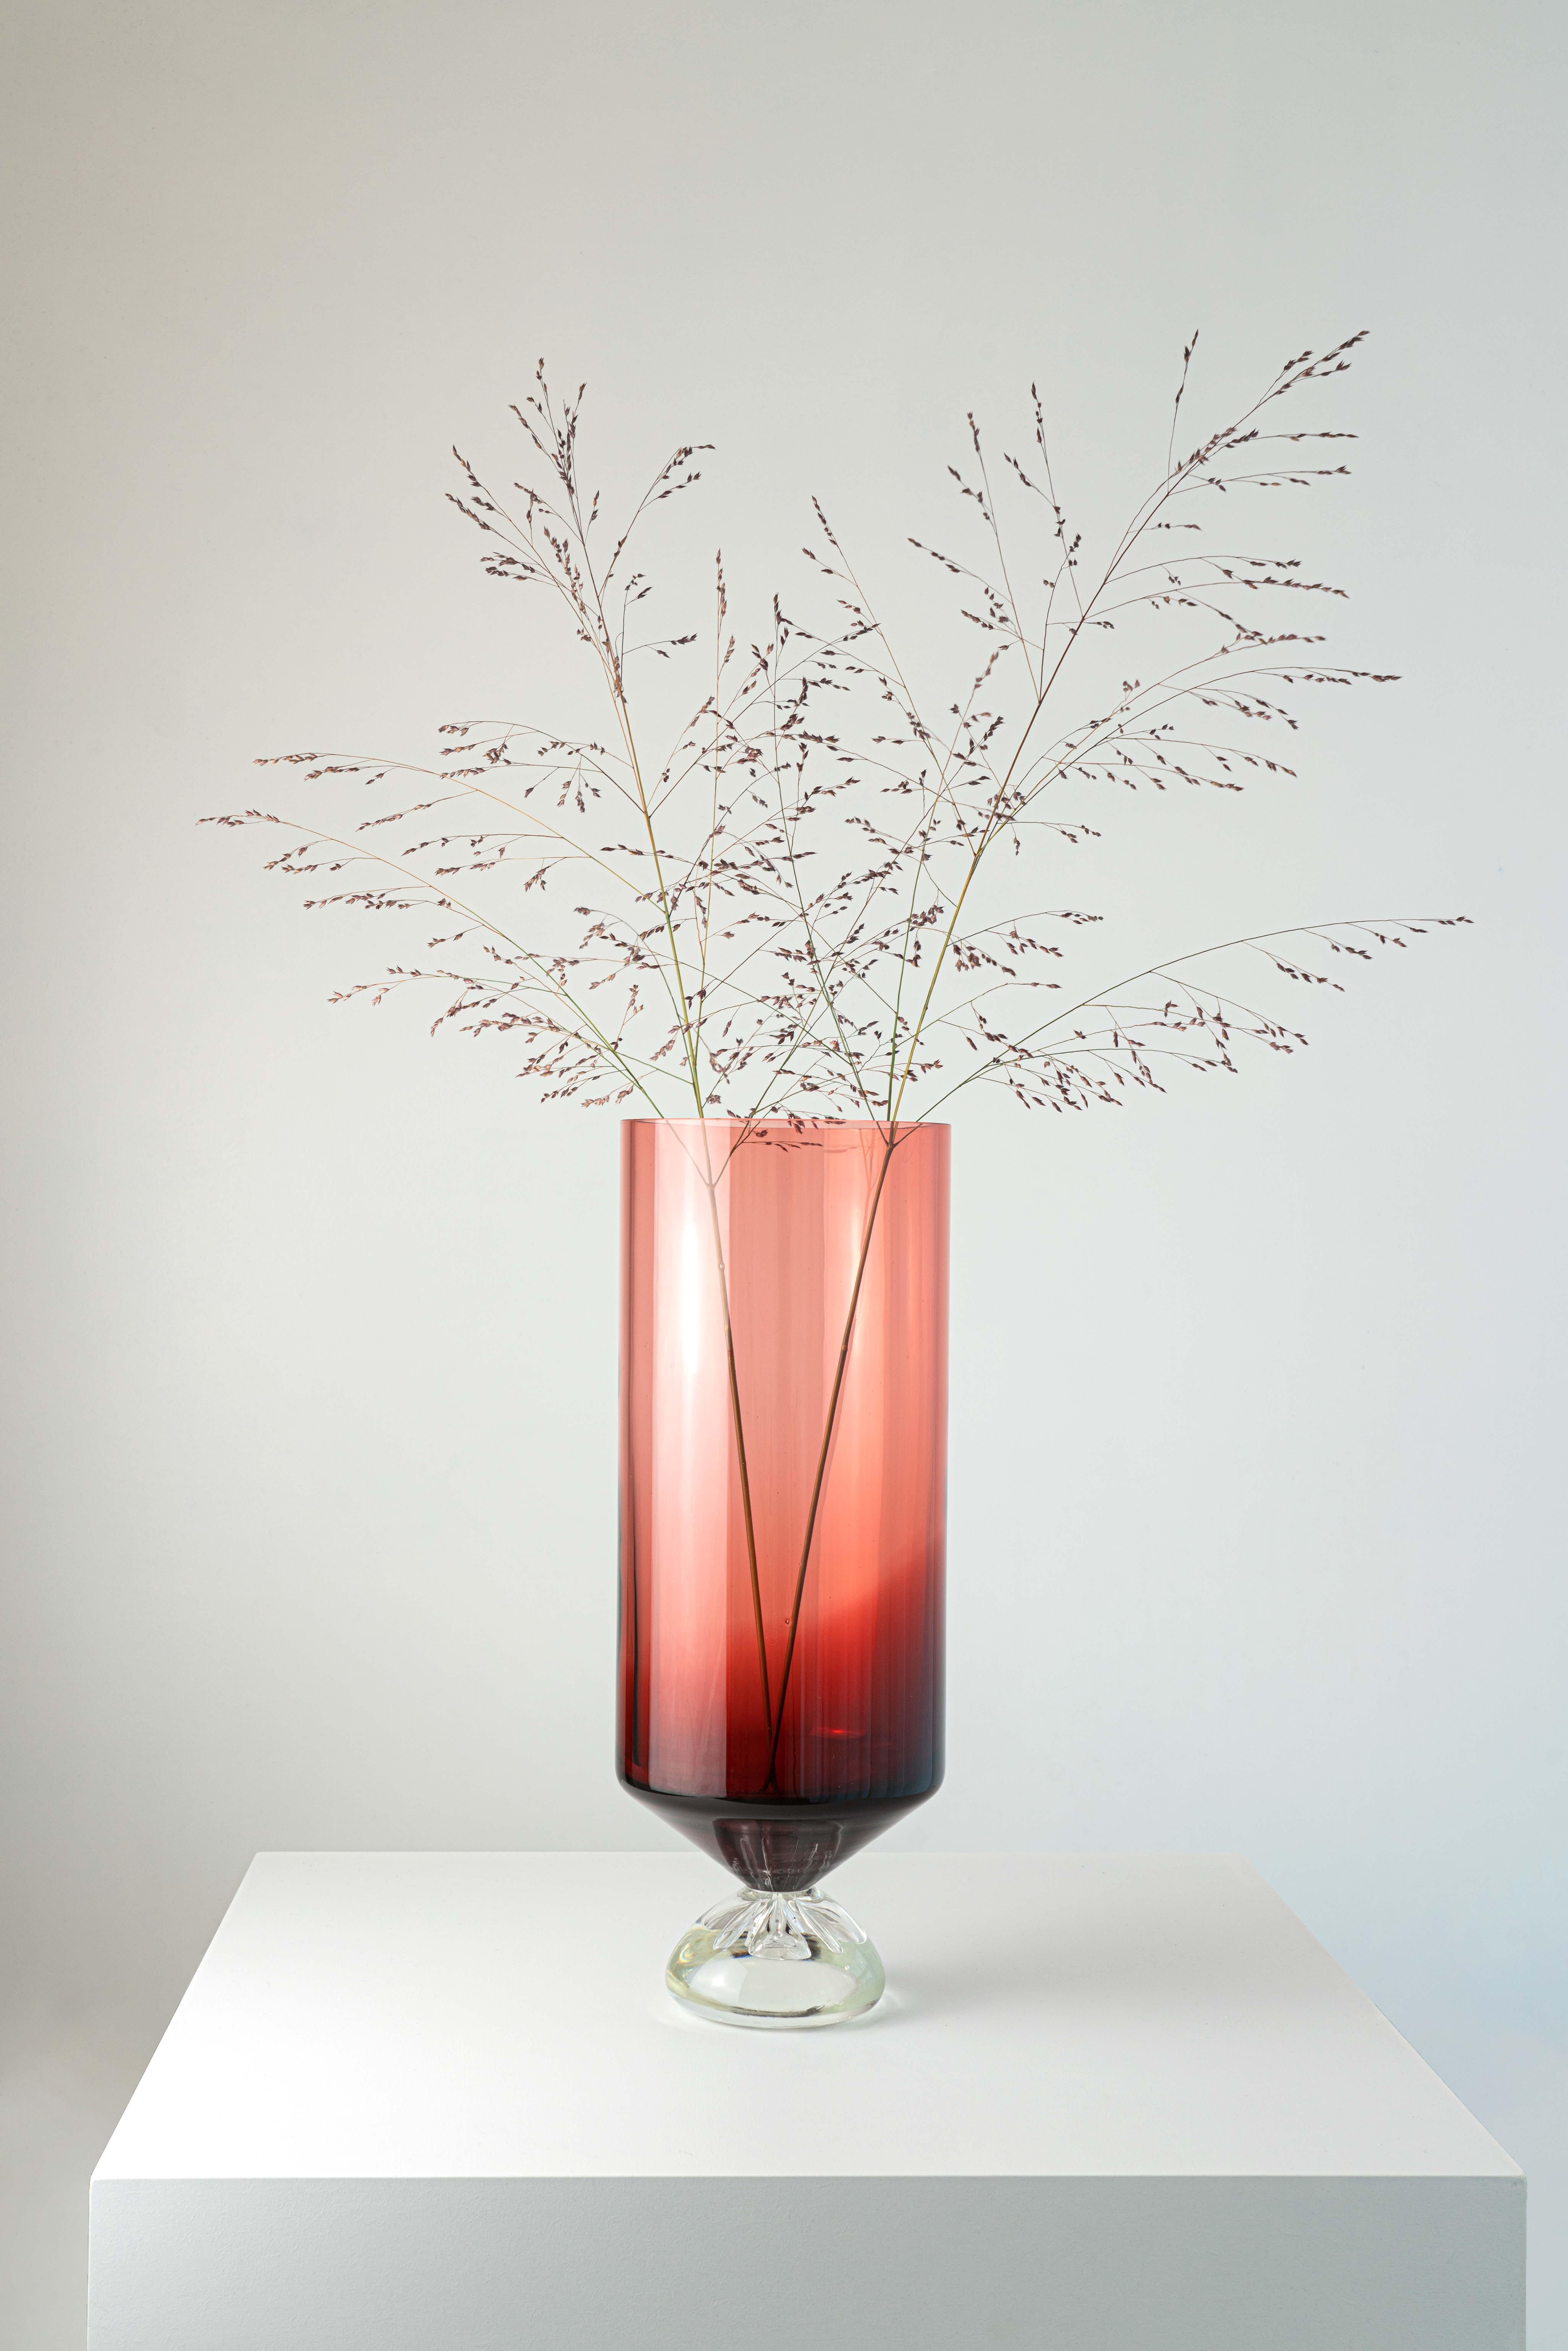 Hand-Crafted Handblown colored glass 'Her Masters Voice' Vase #2 by Selma Hamstra For Sale